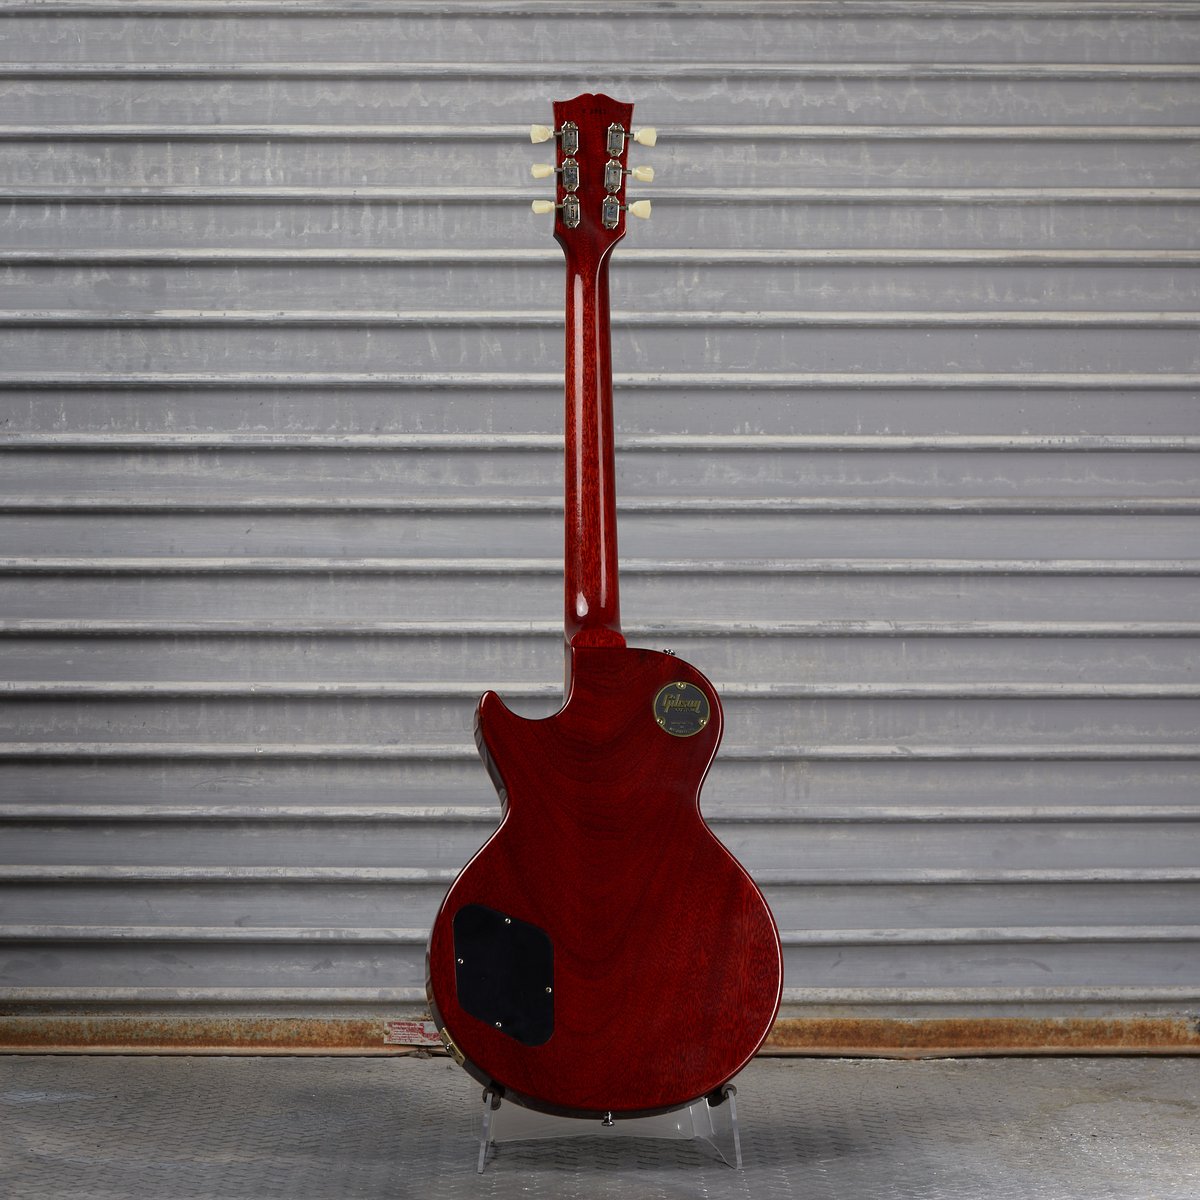 Gibson Mod Collection. Rarities. Exclusives. Customized one-off guitar mods.

Expand your personal collection with unique features, builds and colors that can only be found on Gibson every Wednesday.

Shop Here: ow.ly/lVY250QMXUZ

#gibson #theoriginal #modcollection